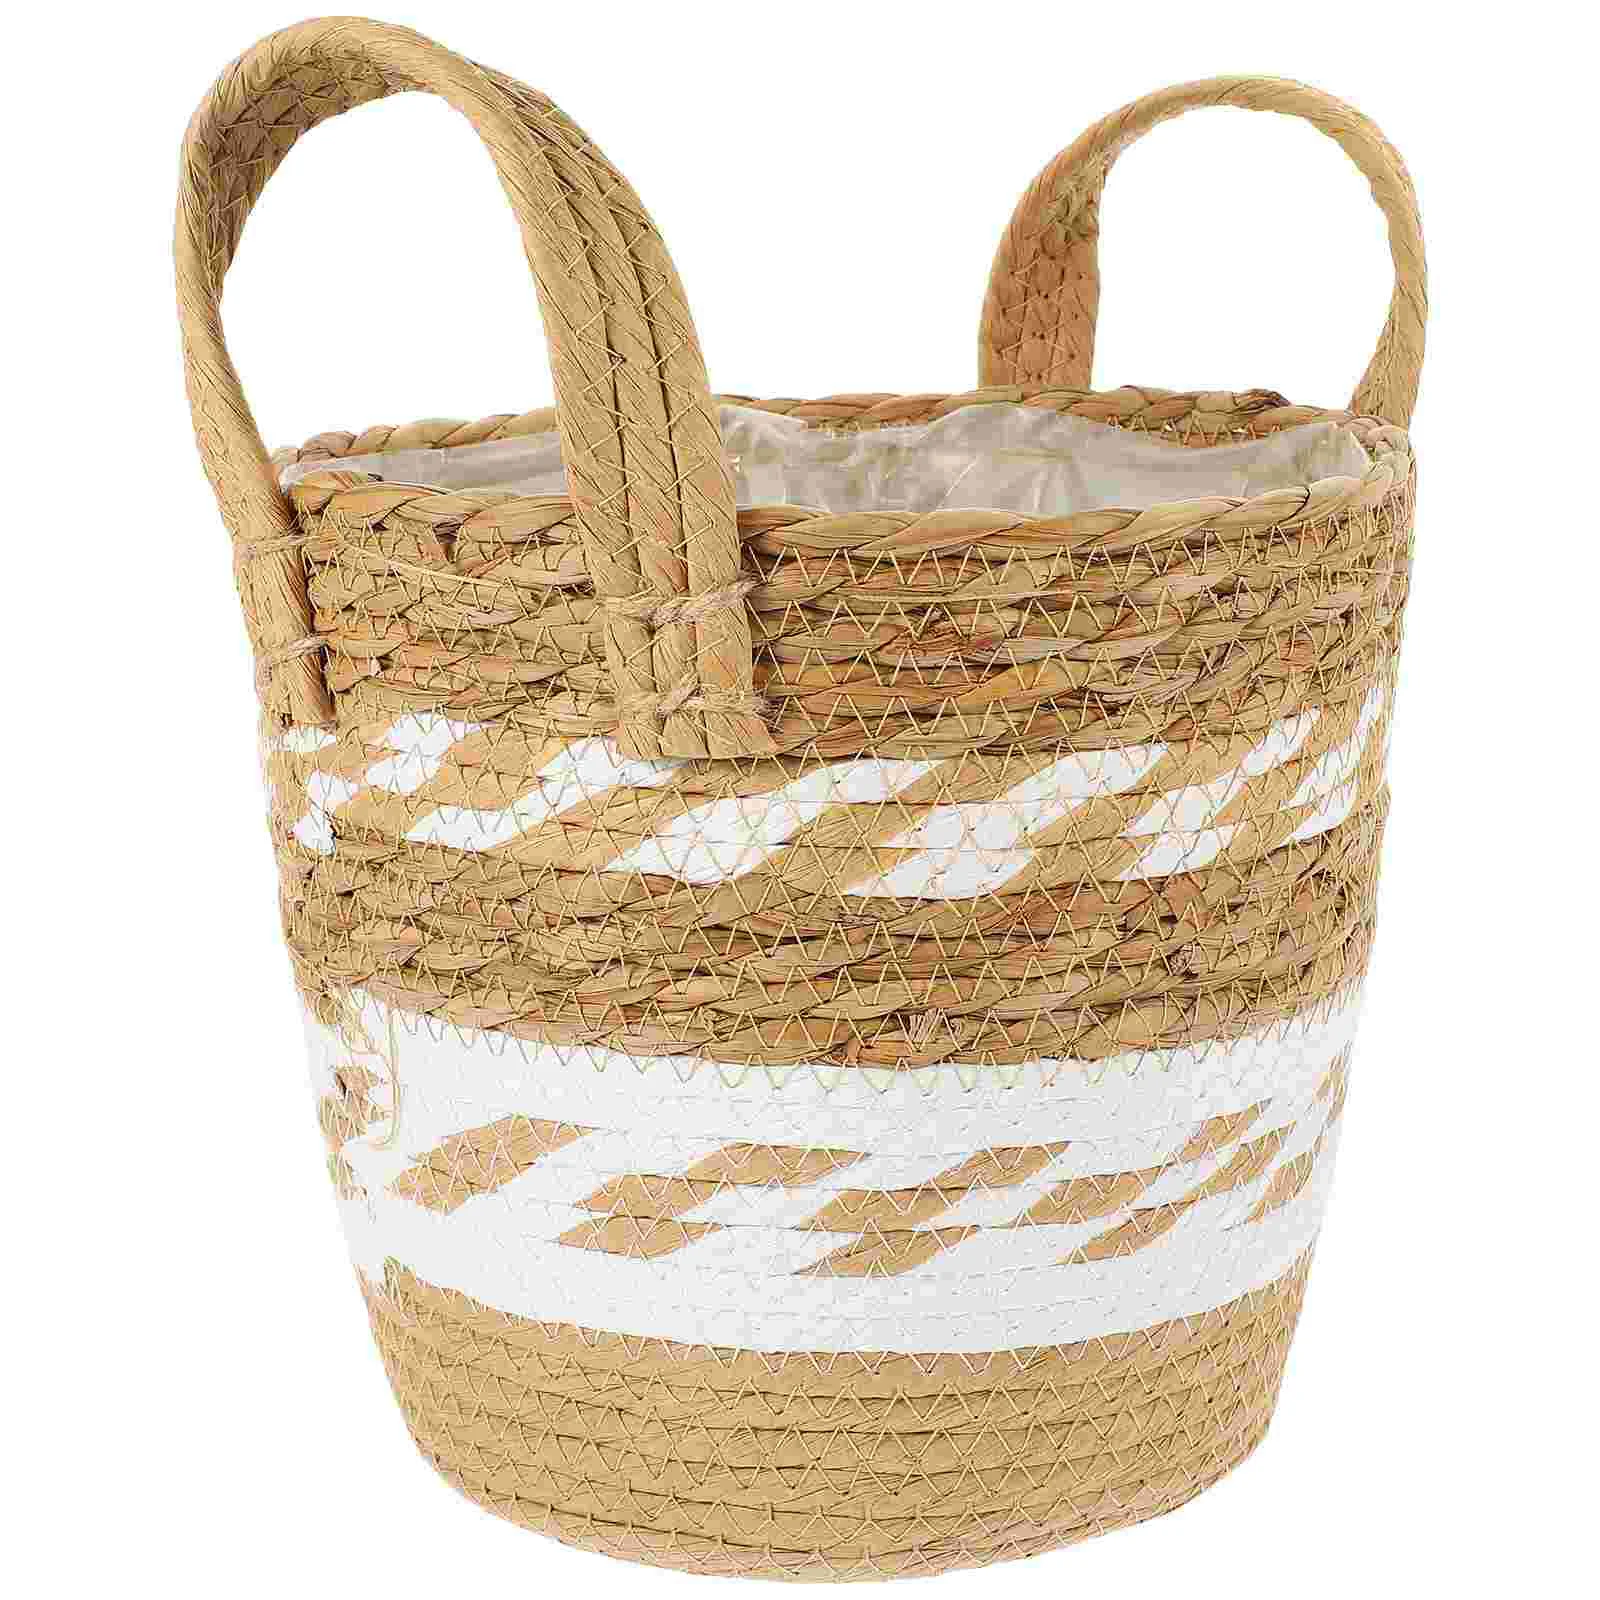 

Basket Woven Planter Seagrass Pot Container Baskets Rattan Storage Flower Belly Grocery Large Organizer Hand Decorative Planters